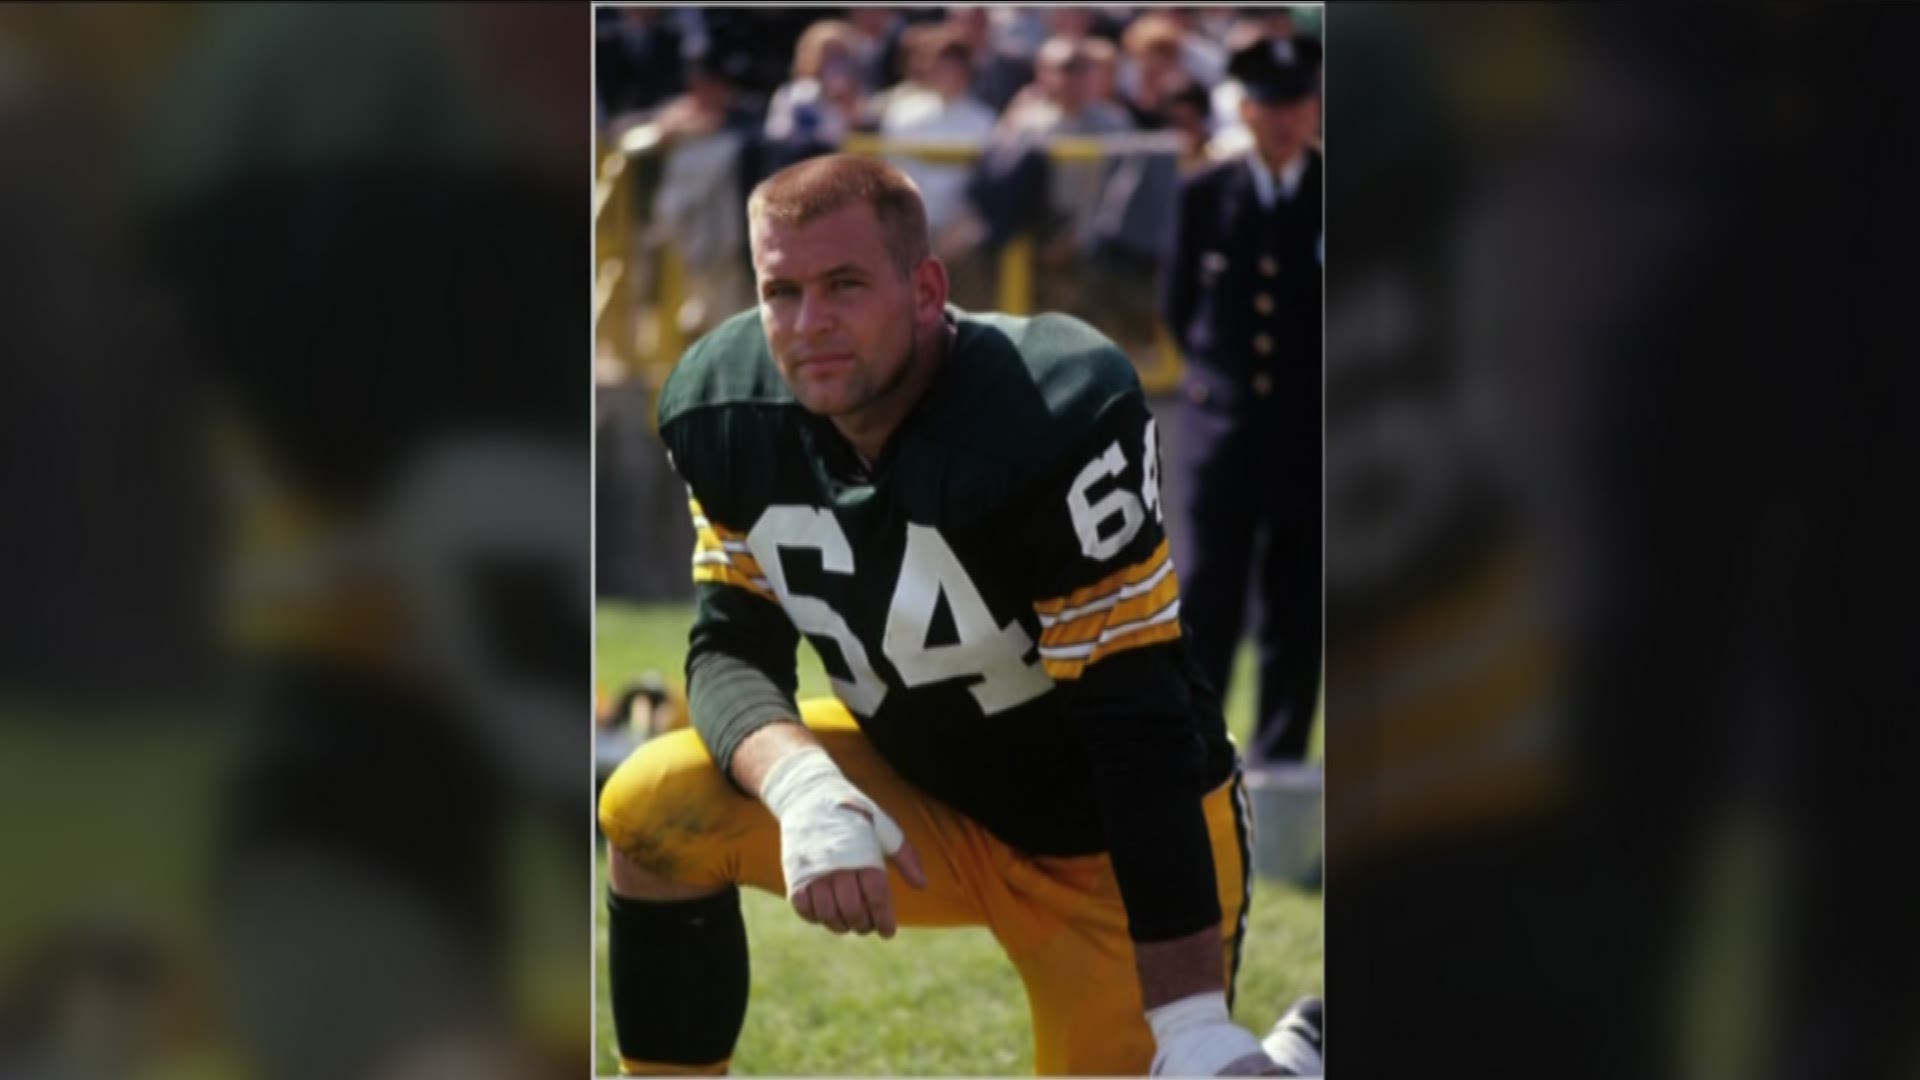 Jerry Krame, the former Idaho Vandal great and two-time Super Bowl champion with the Green Bay Packers, has been selected as a finalist for the Pro Football Hall of Fame.